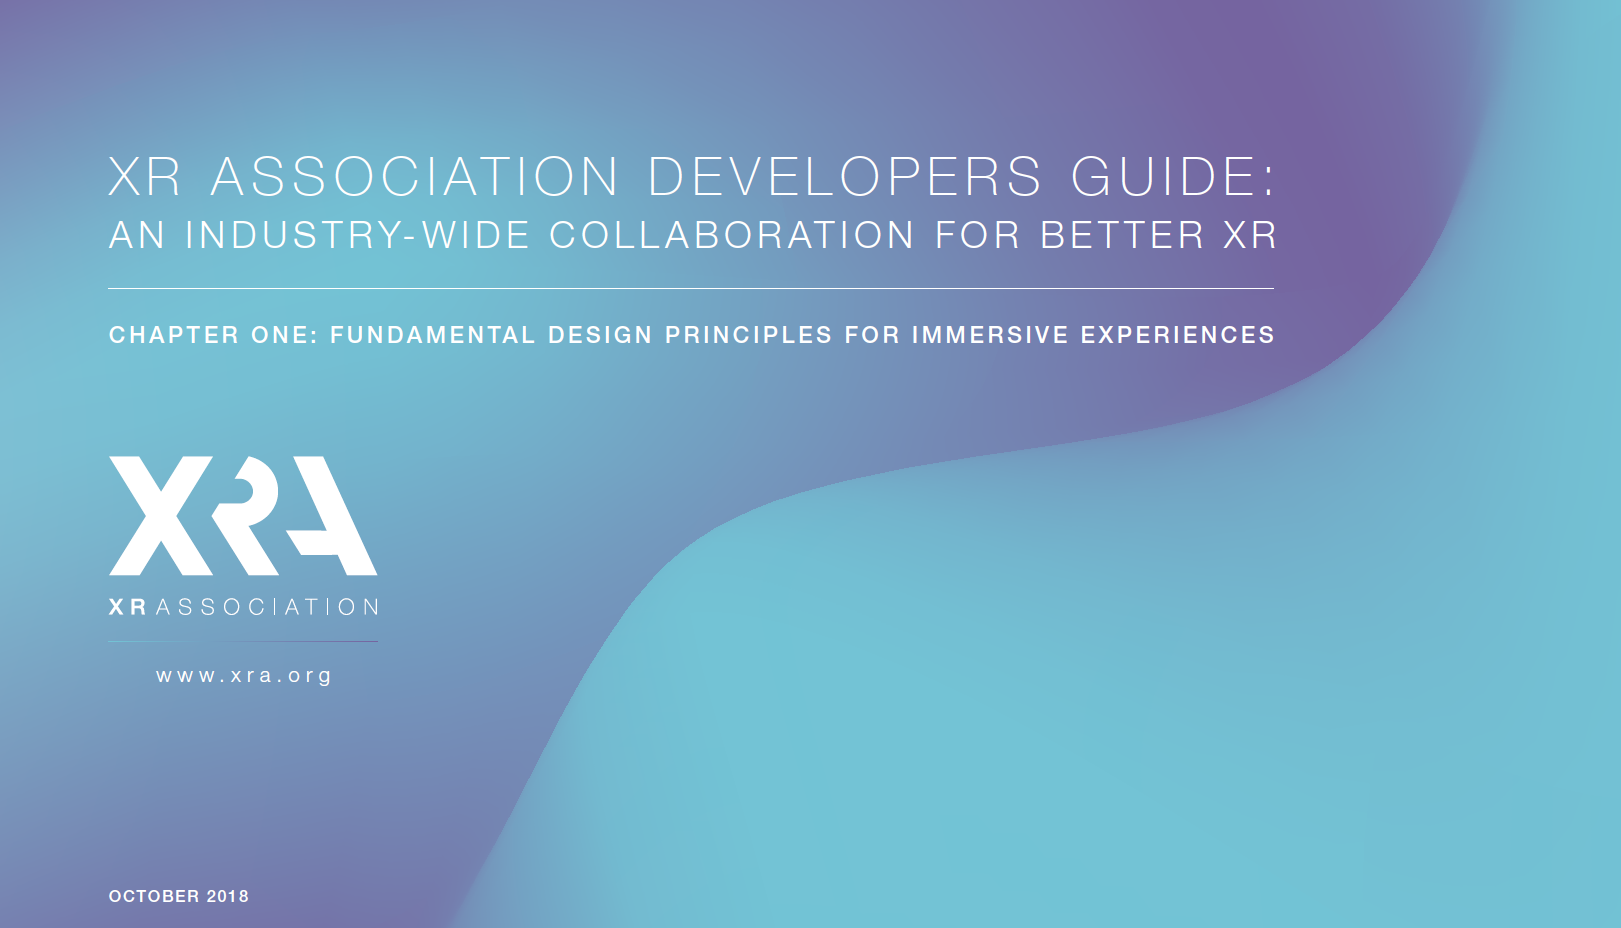 XRA’S DEVELOPERS GUIDE, CHAPTER ONE: Fundamental Design Principles for Immersive Experiences